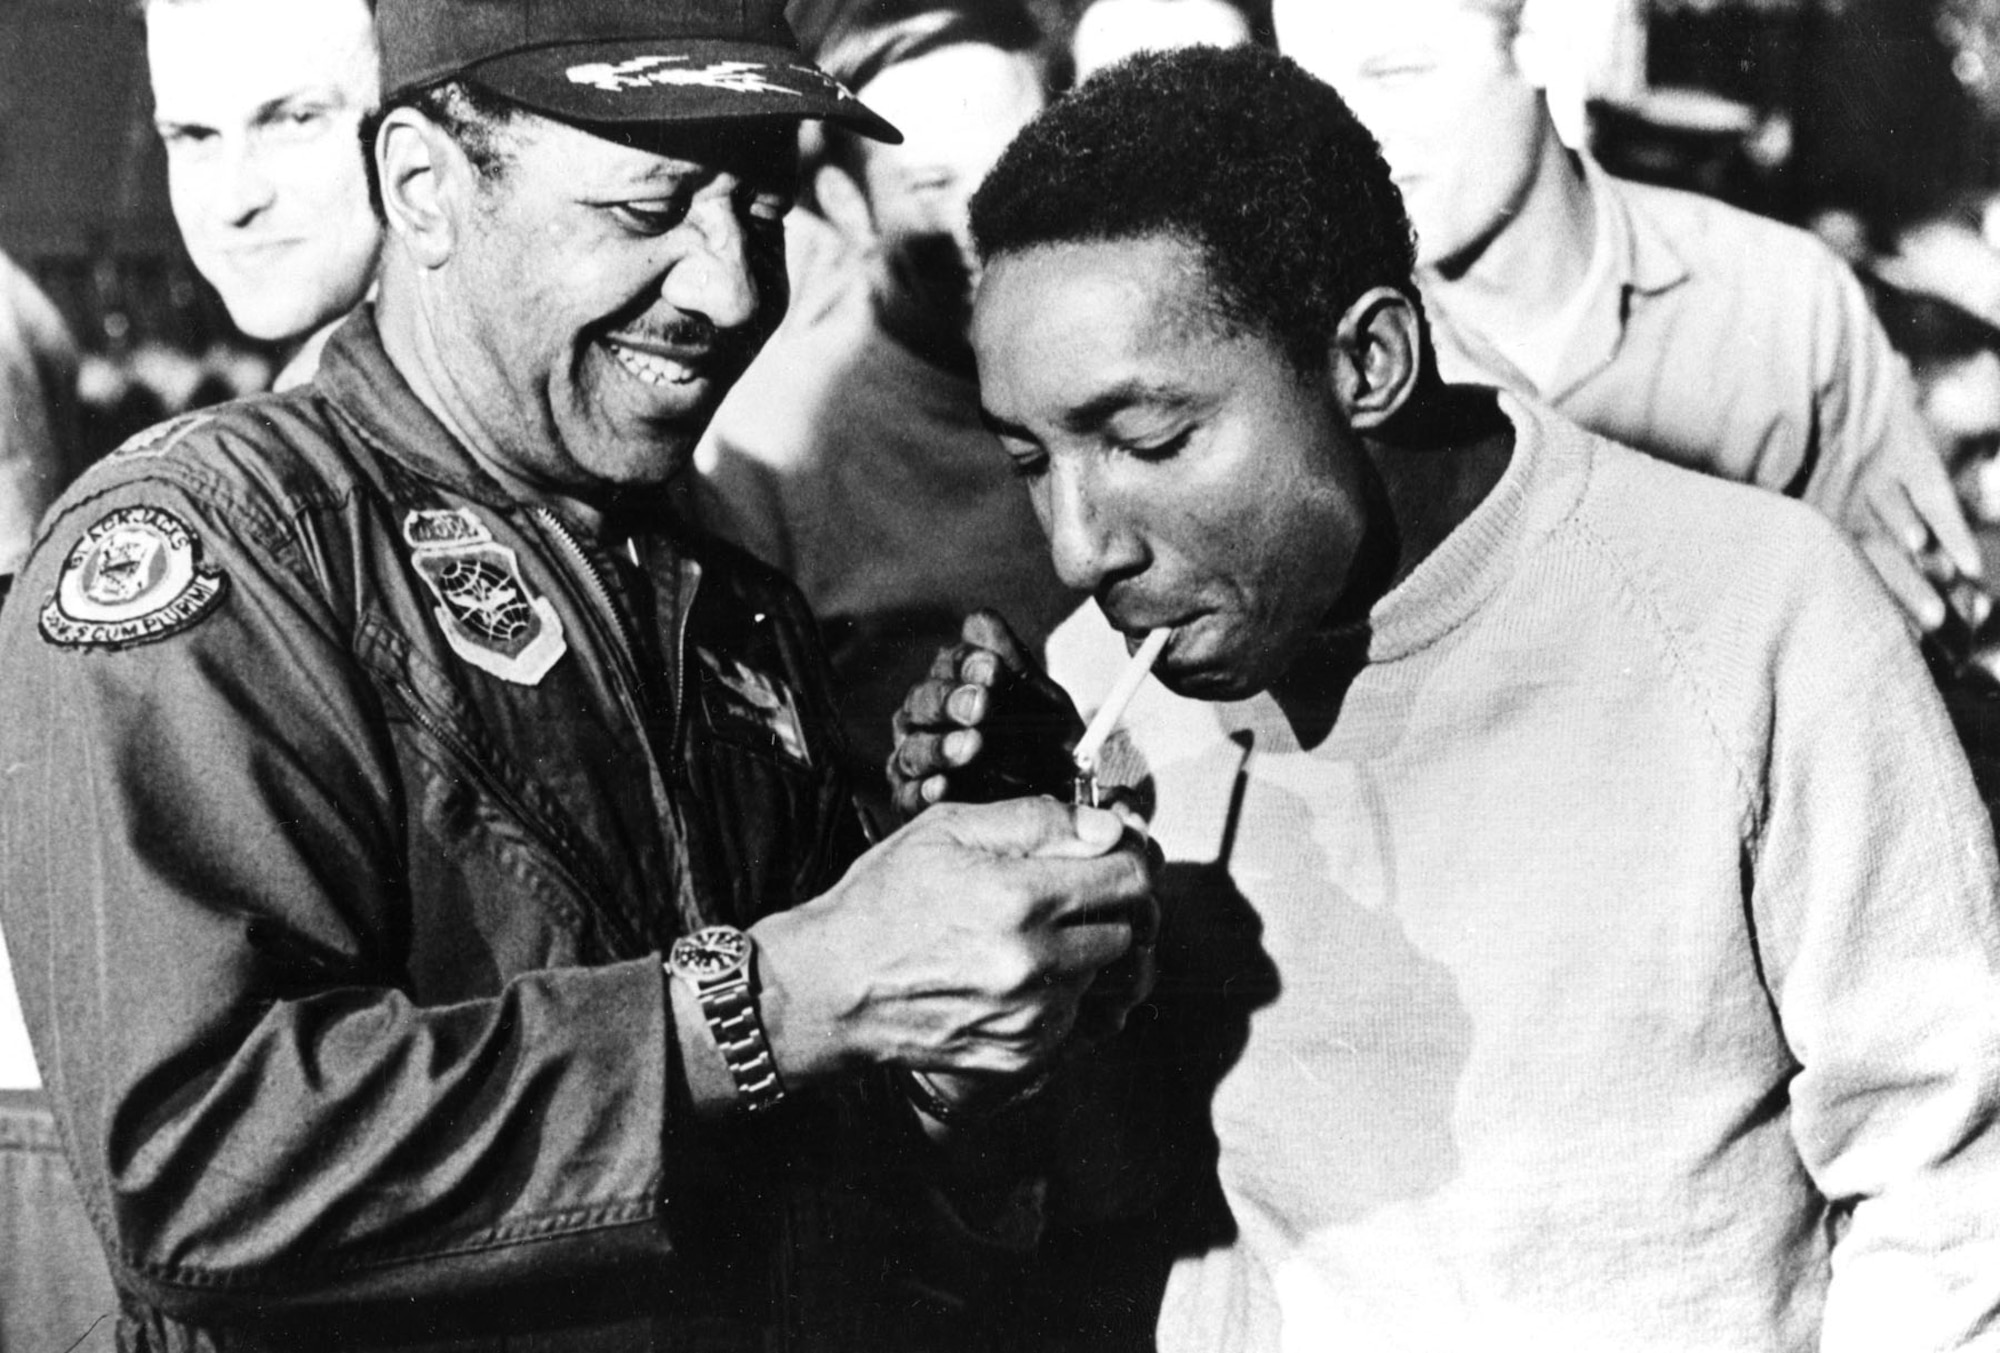 Lt. Col. Warren lighting a cigarette for an "old friend" who was one of the first group of Americans released from POW camp by the North Vietnamese. The items worn by Lt. Col. Warren in this photo are those on display. (U.S. Air Force photo)